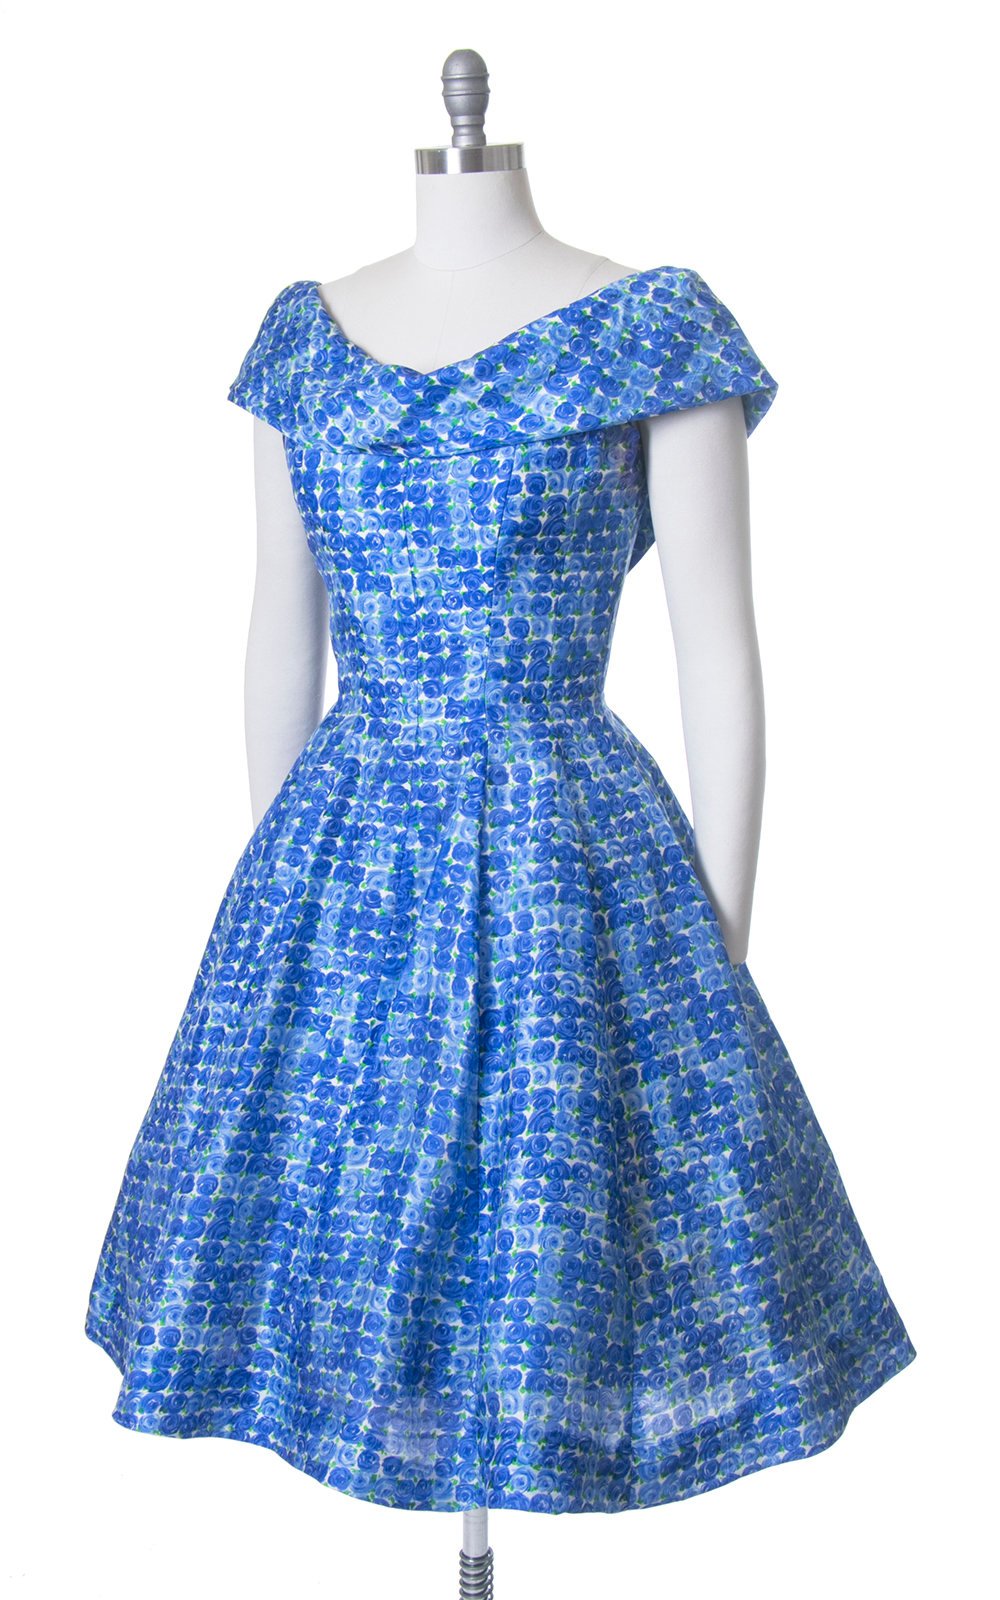 Vintage 1950s Dress | 50s GIGI YOUNG Silk Blue Rose Floral Print Full Skirt Party Dress with Petticoat (medium)